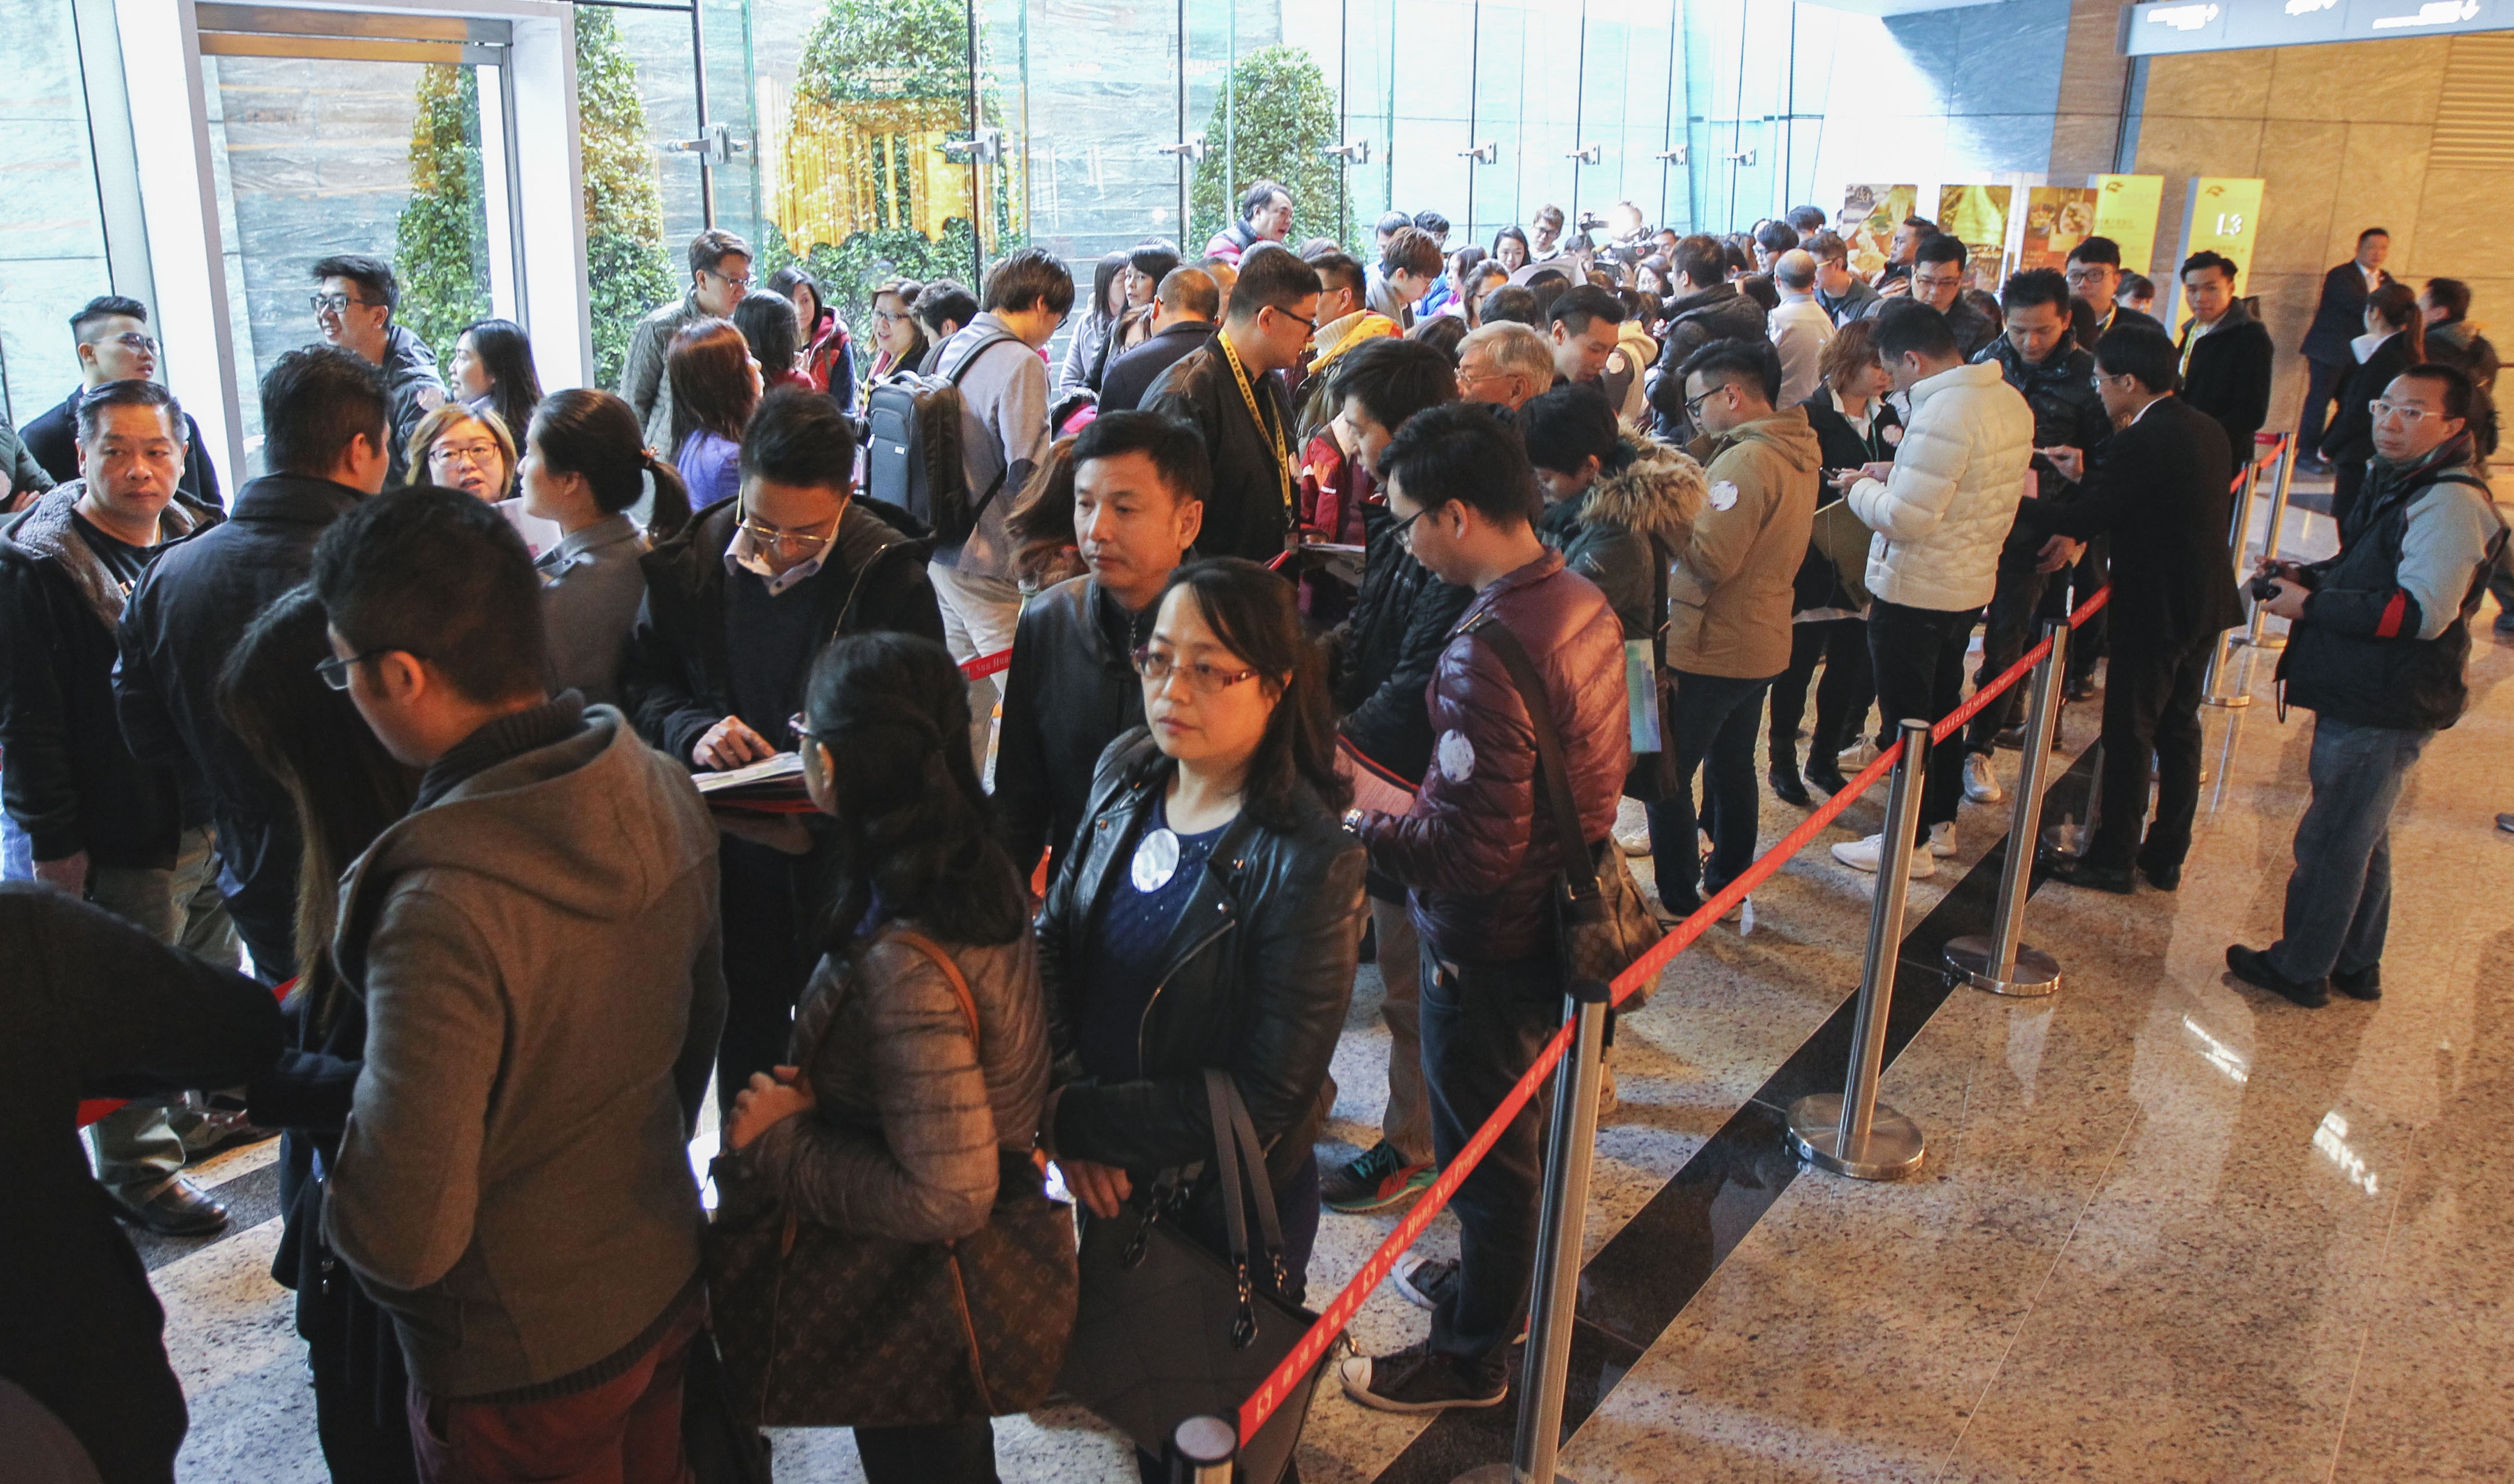 Buyers queue up at Sun Hung Kai Properties’ launch of its St Barths apartment complex at the International Commerce Centre (ICC) in West Kowloon. Photo: SCMP / Roy Issa